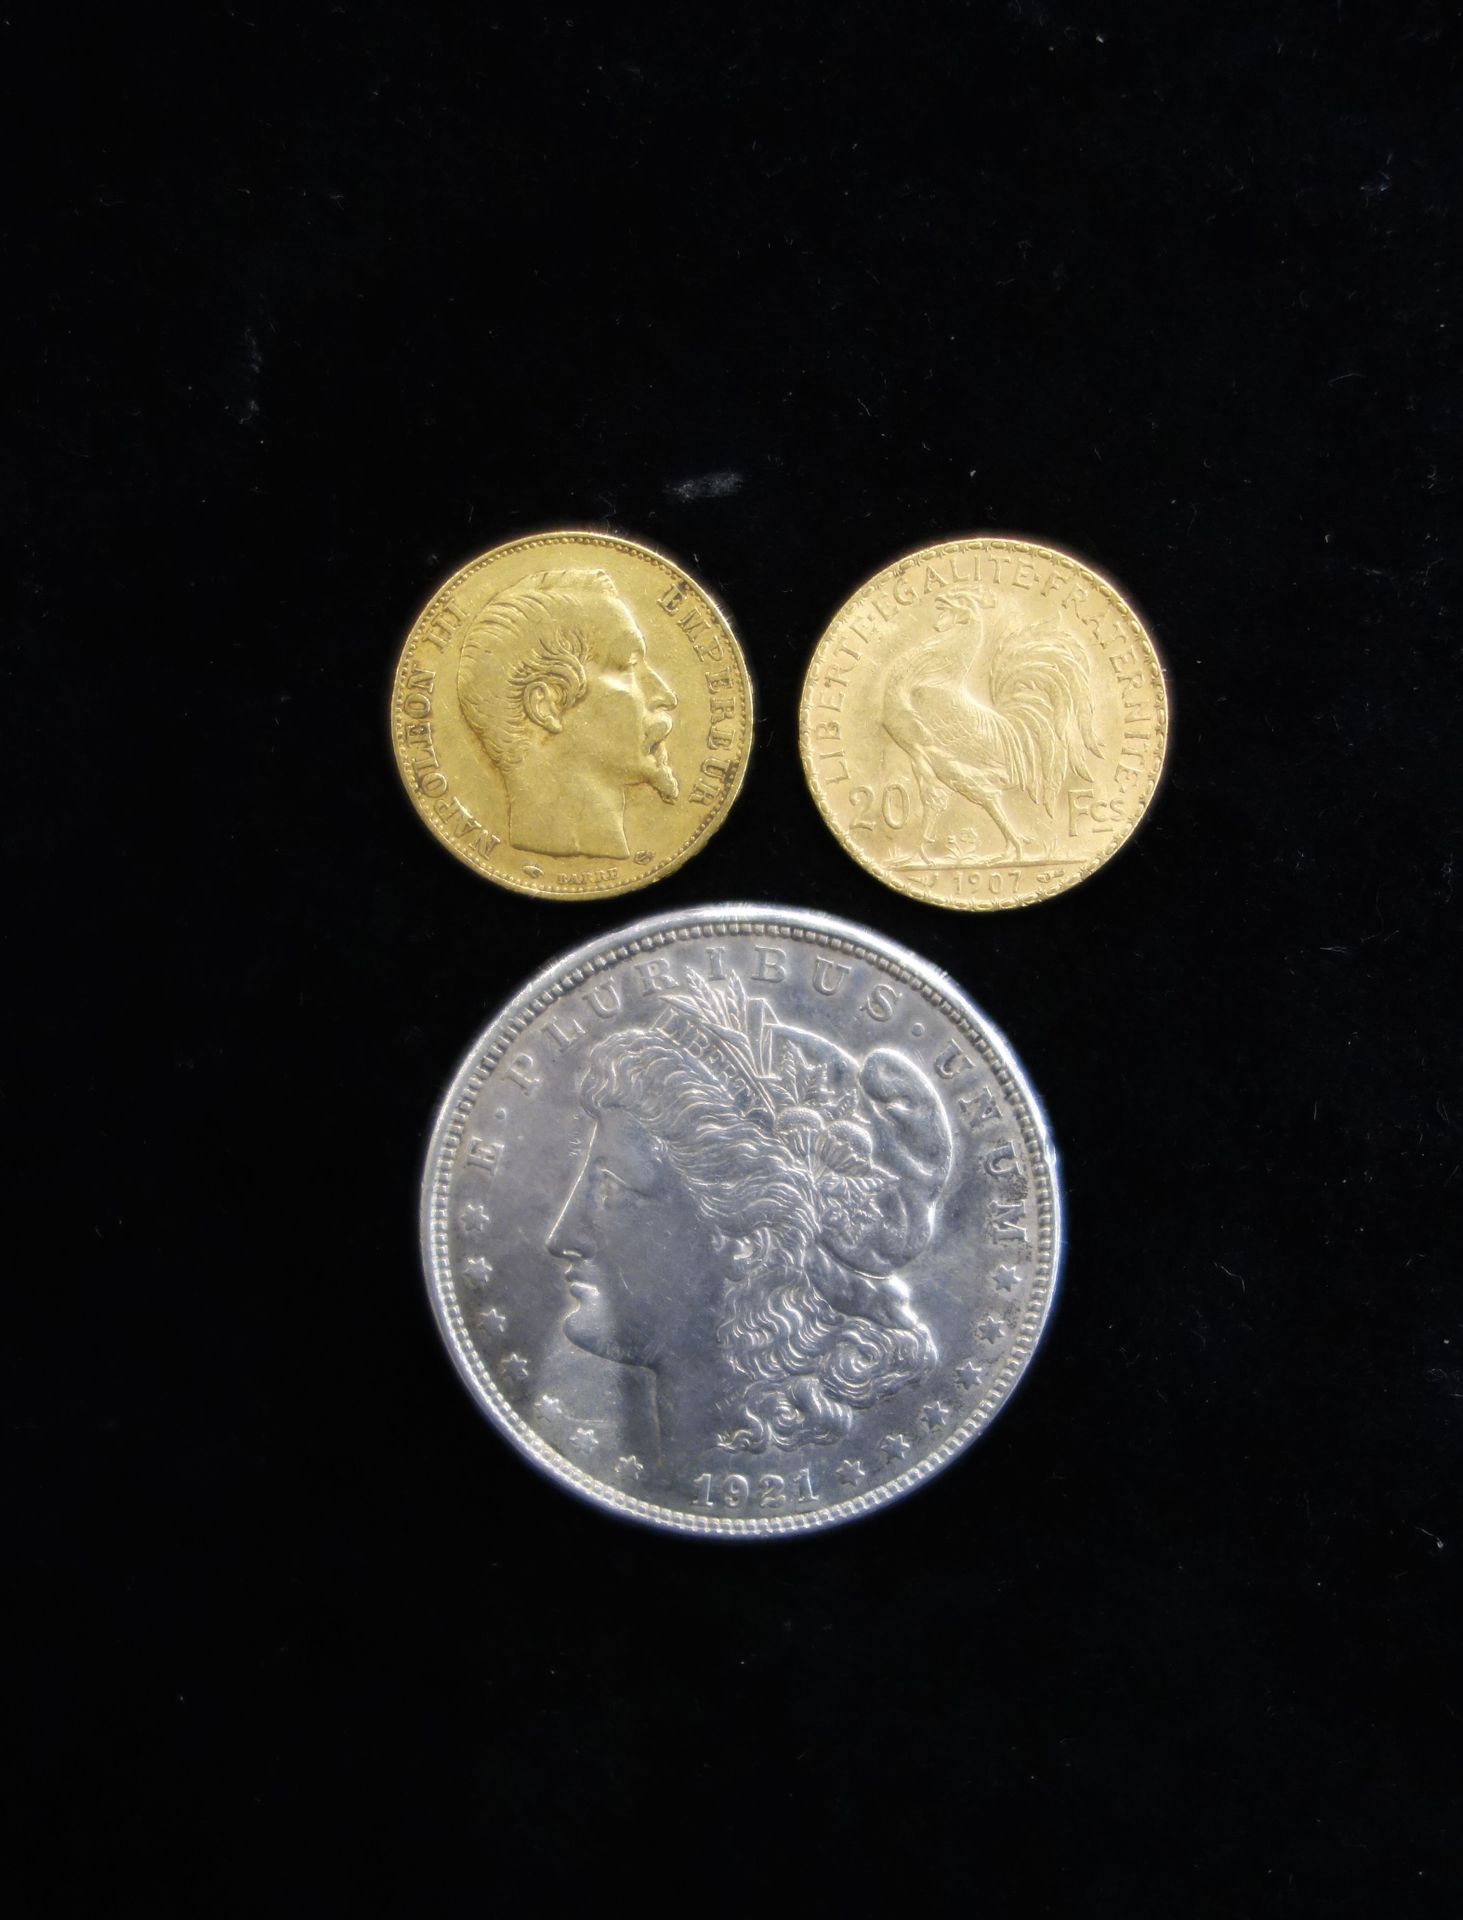 Null Lot:
Two 20 F gold coins. Years 1855 and 1907.
Weight: 12.86 g
1 US $ silve&hellip;